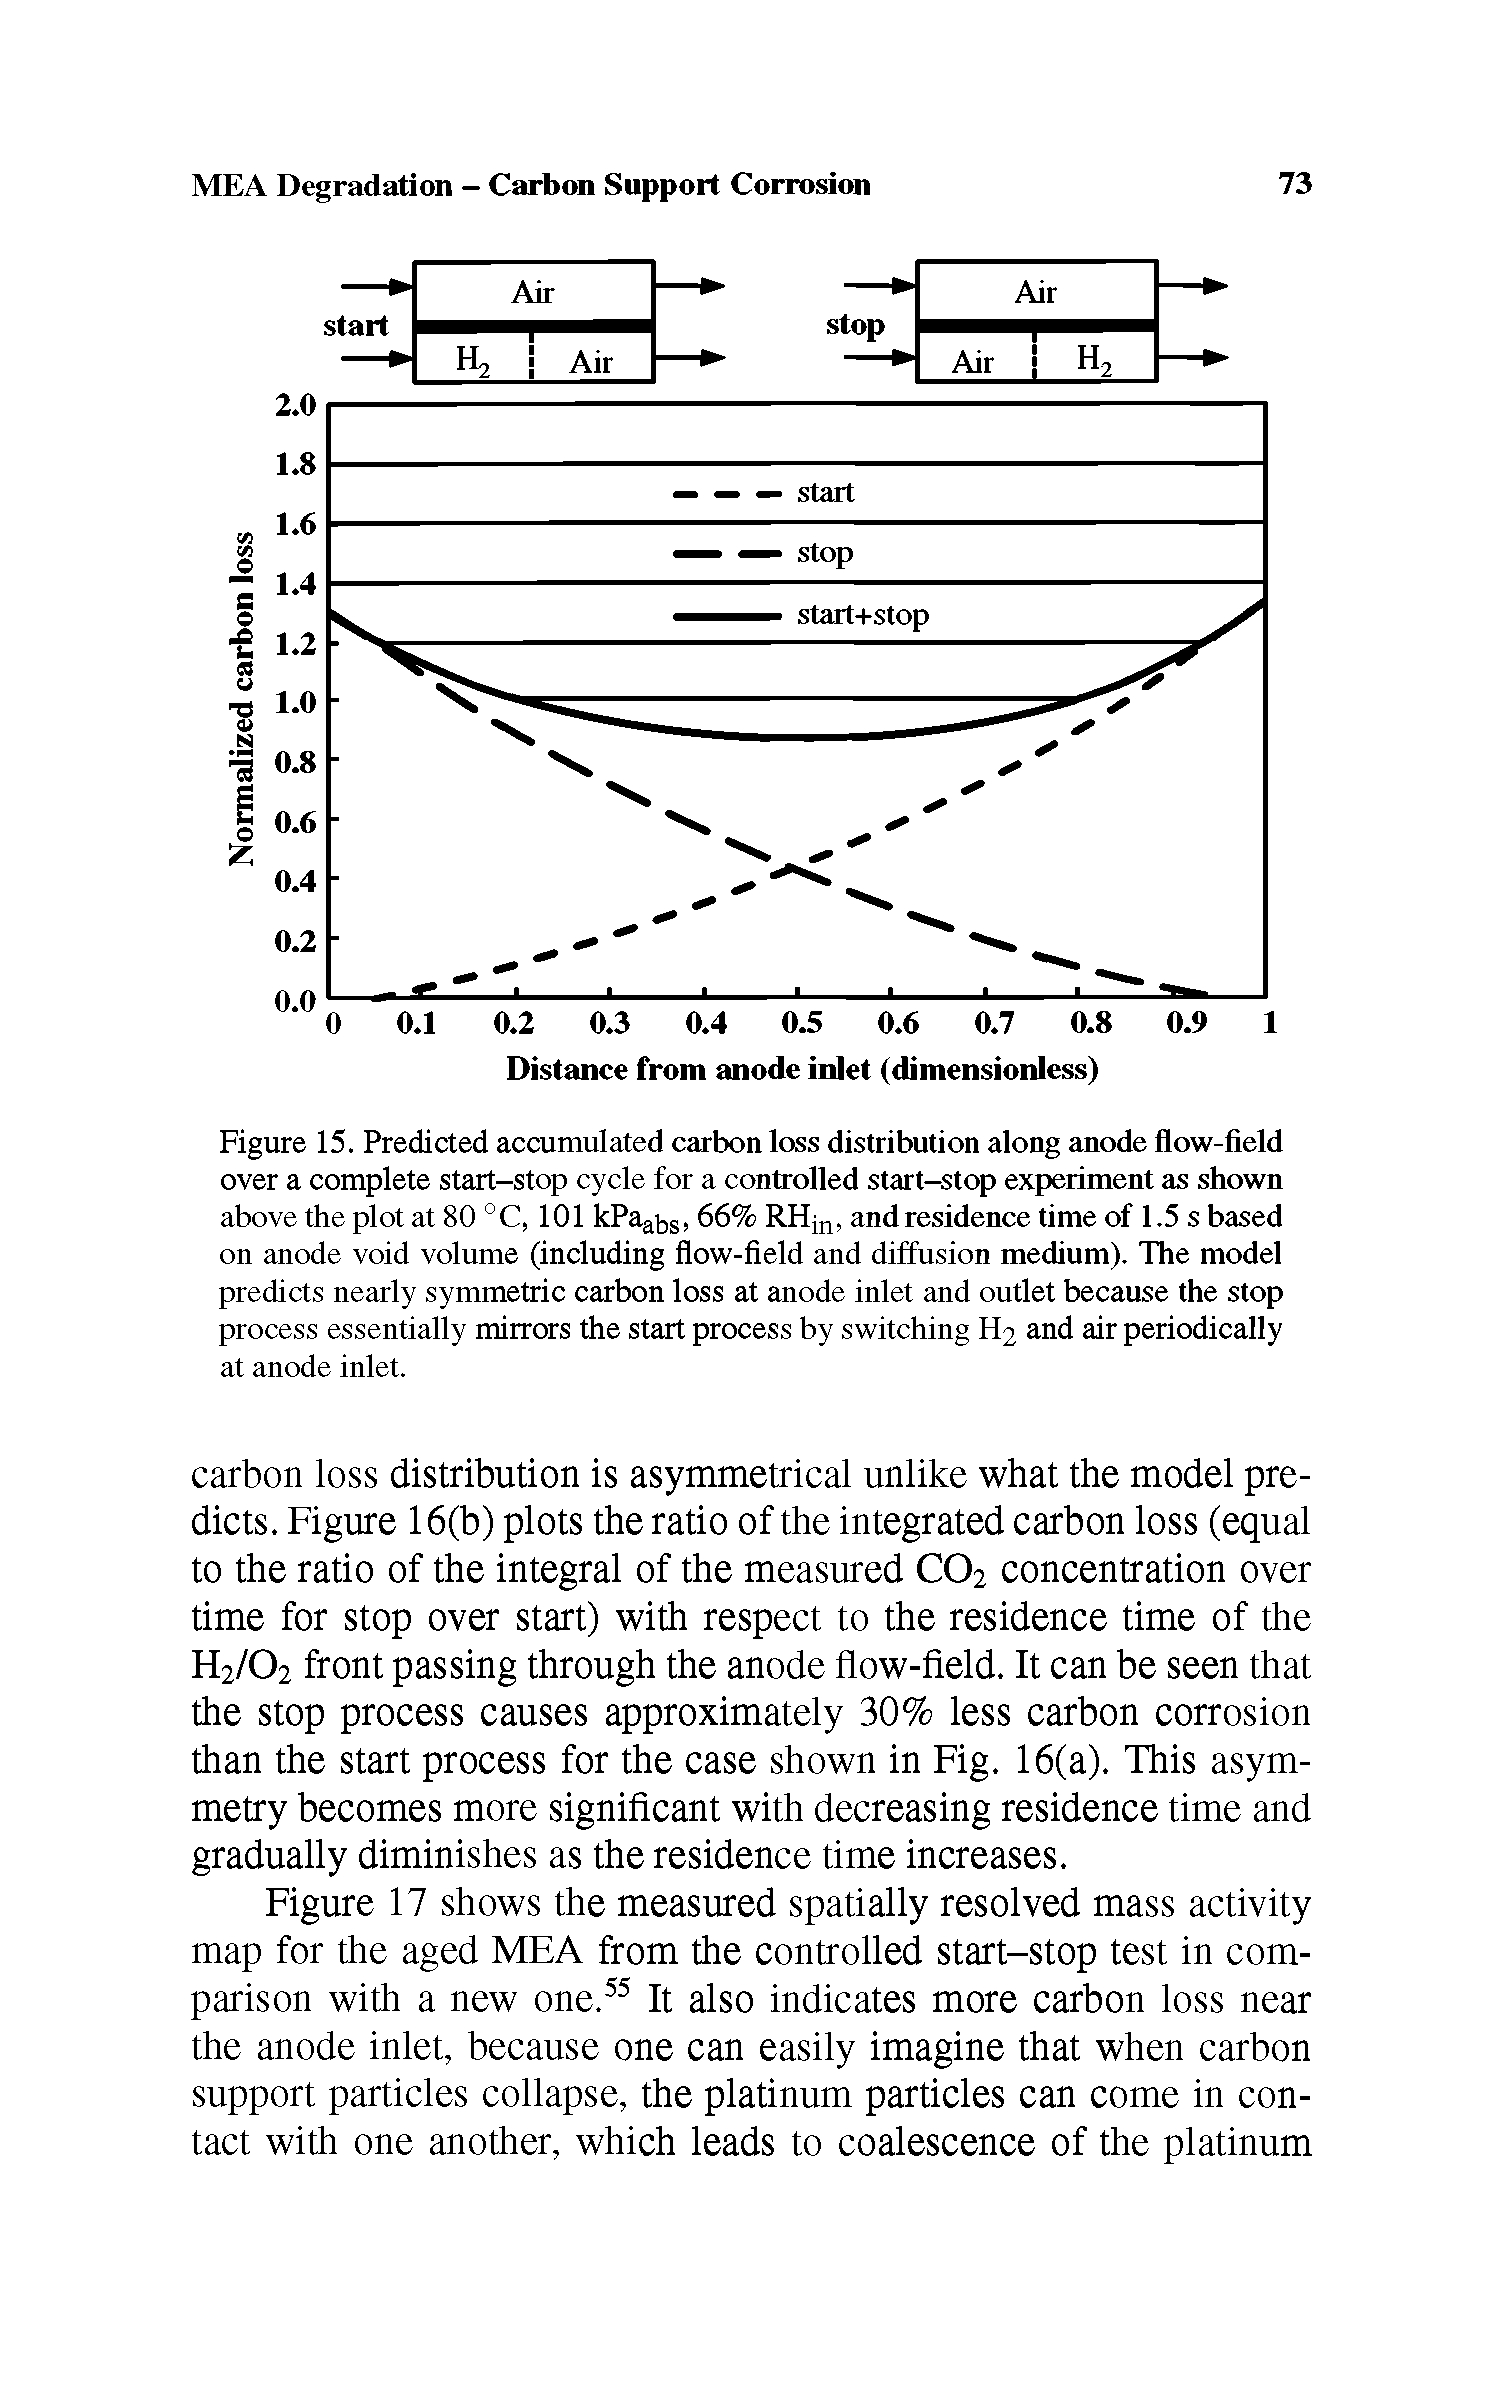 Figure 15. Predicted accumulated carbon loss distribution along anode flow-field over a complete start-stop cycle for a controlled start-stop experiment as shown above the plot at 80 °C, 101 kPaabs, 66% RHjn, and residence time of 1.5 s based on anode void volume (including flow-field and diffusion medium). The model predicts nearly symmetric carbon loss at anode inlet and outlet because the stop process essentially mirrors the start process by switching H2 and air periodically at anode inlet.